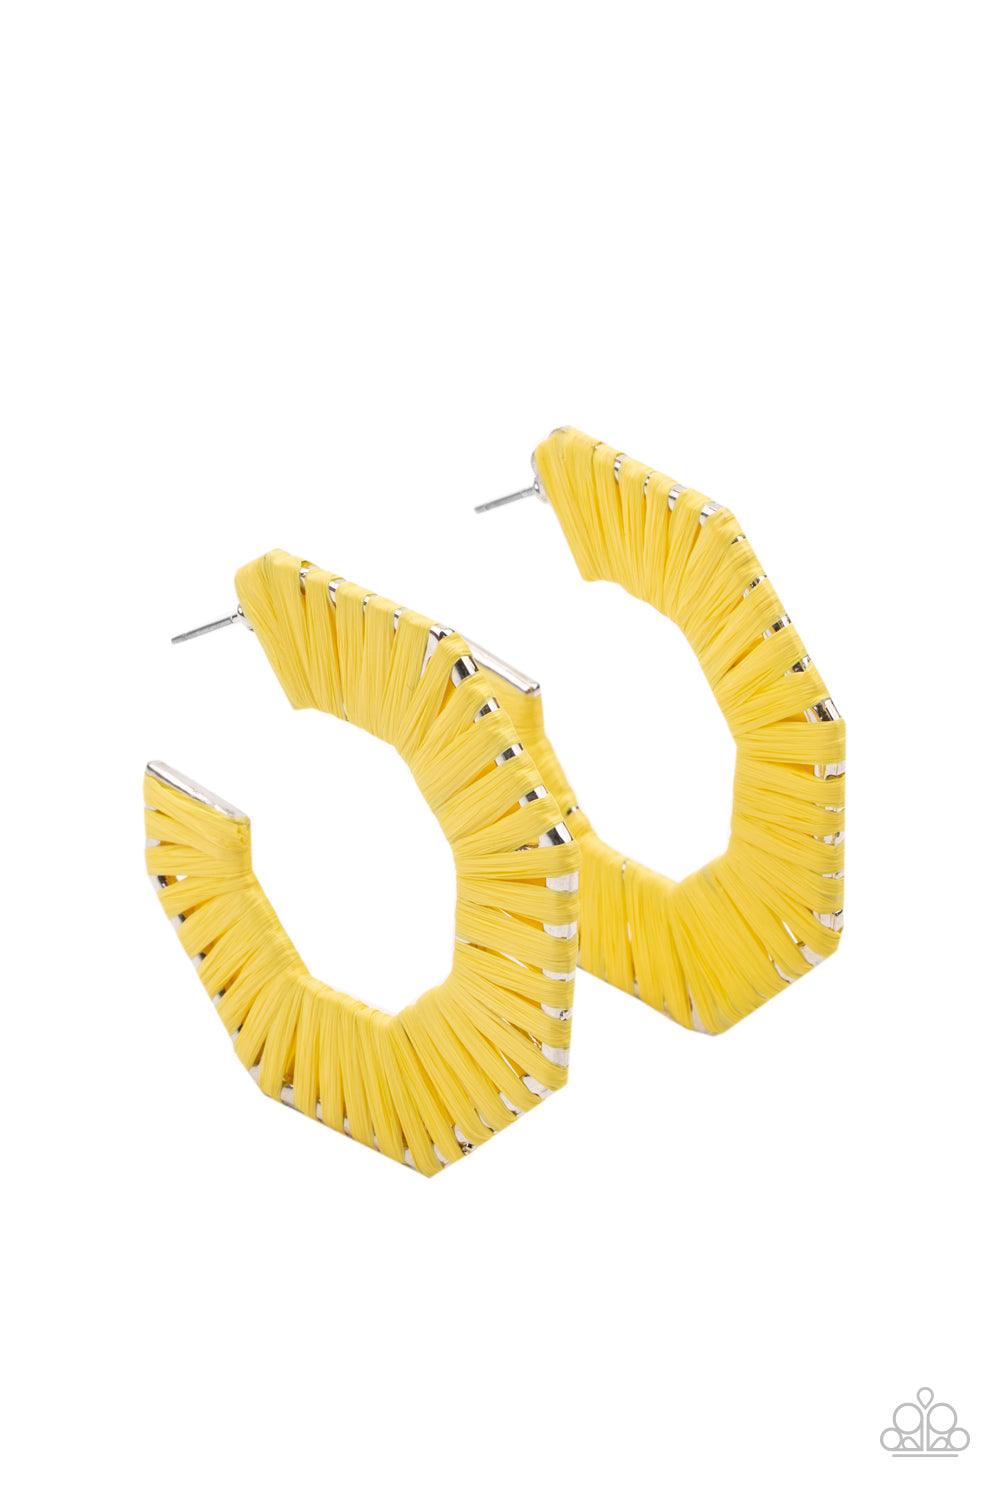 Paparazzi Accessories Fabulously Fiesta - Yellow Illuminating wicker-like cording is wrapped around a hexagonal hoop, creating a colorful pop of color. Earring attaches to a standard post fitting. Hoop measures approximately 2" in diameter. Sold as one pa